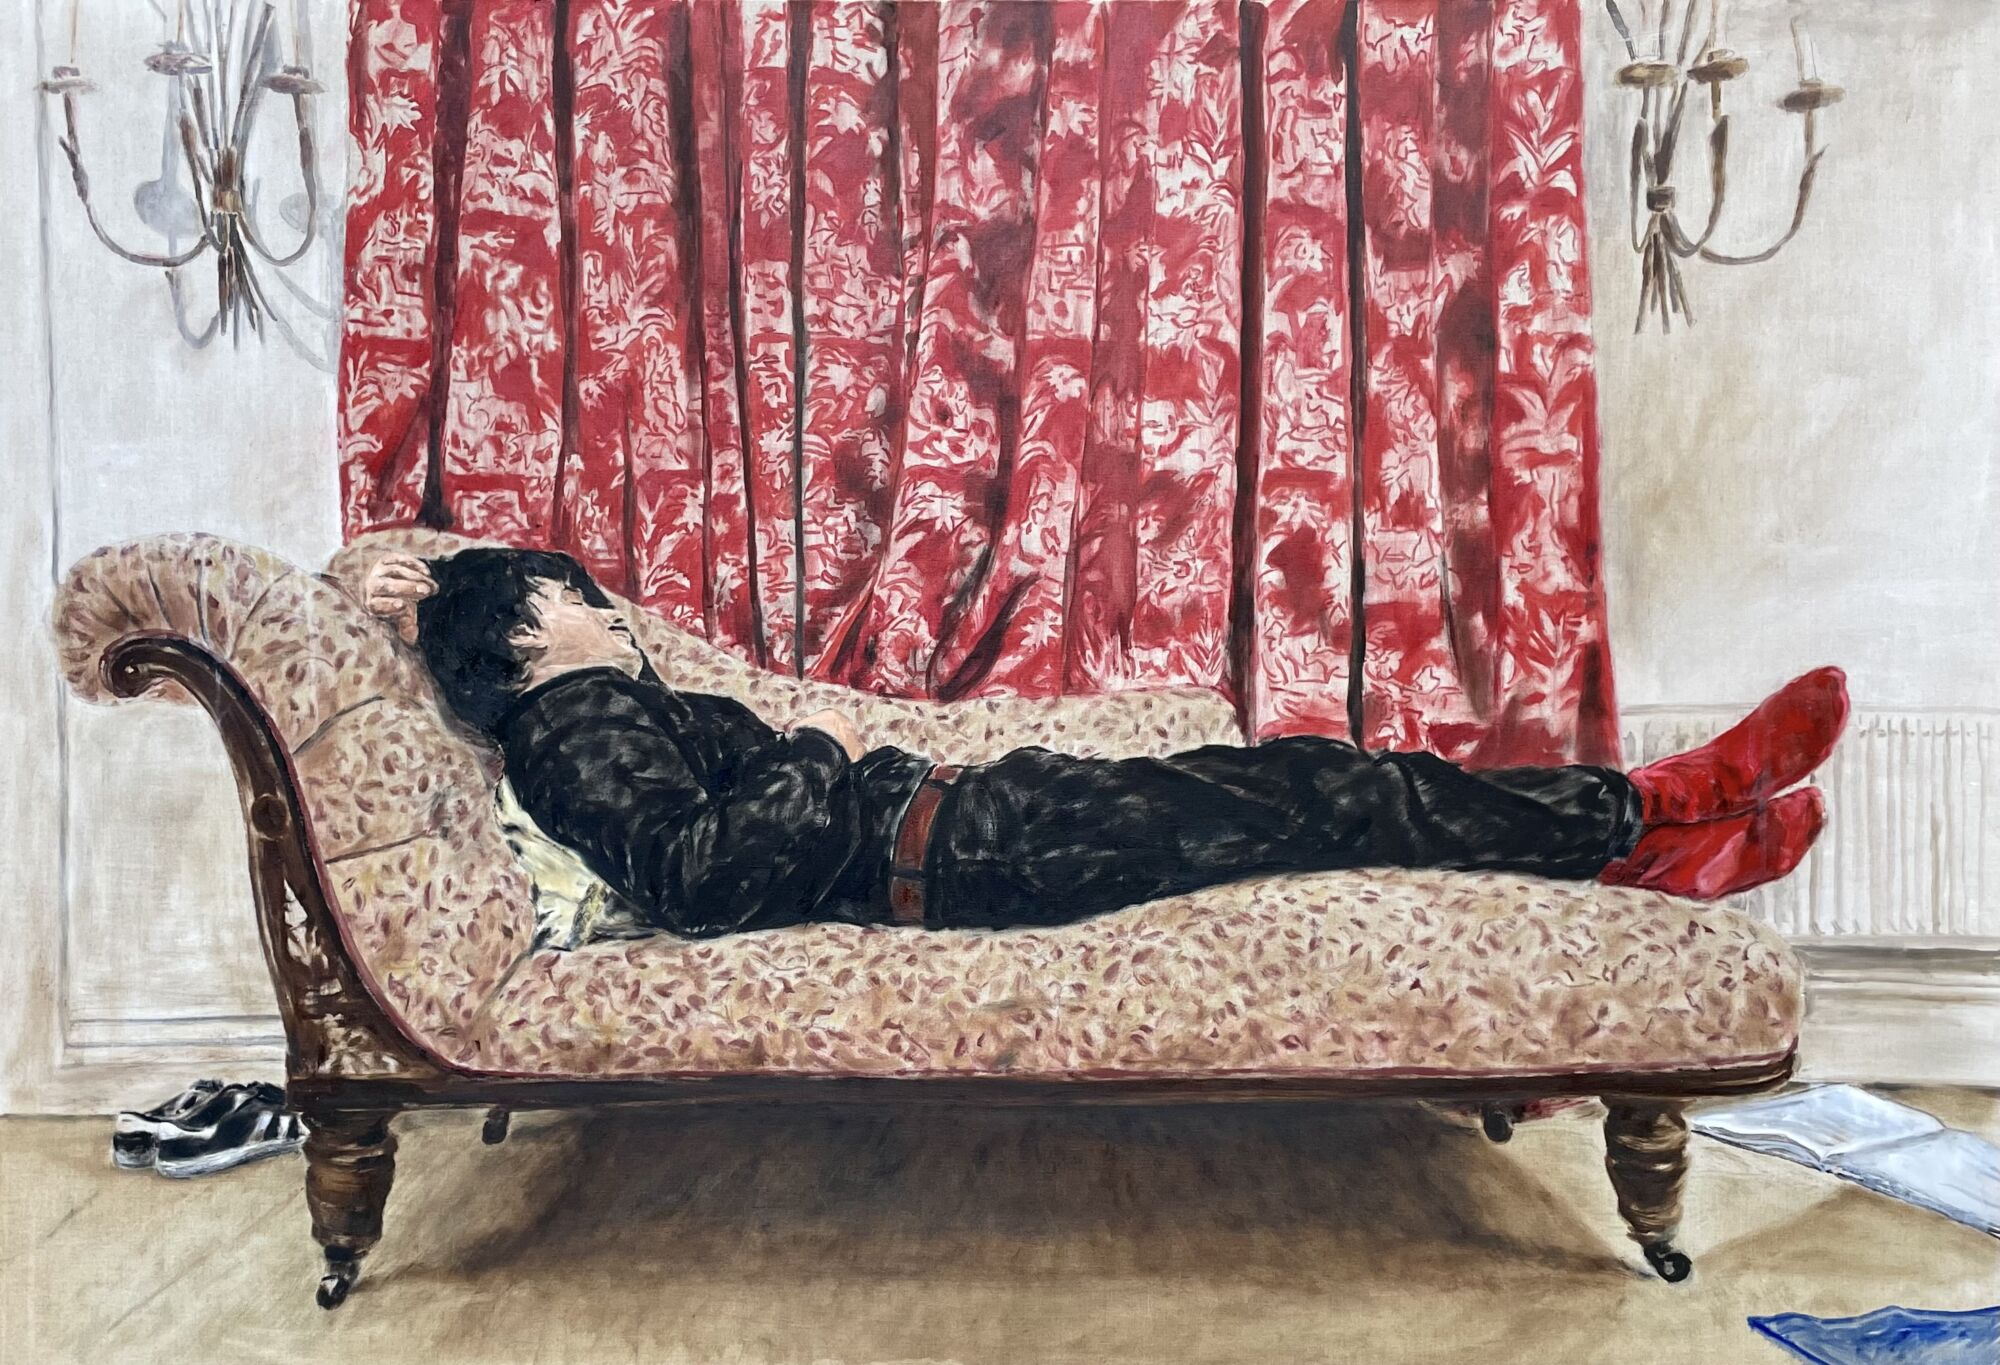 The Wick - Jobard Lounging. Oil on Linen. 110x160cm, by Hugo Hamper-Potts, courtesy of the artist 